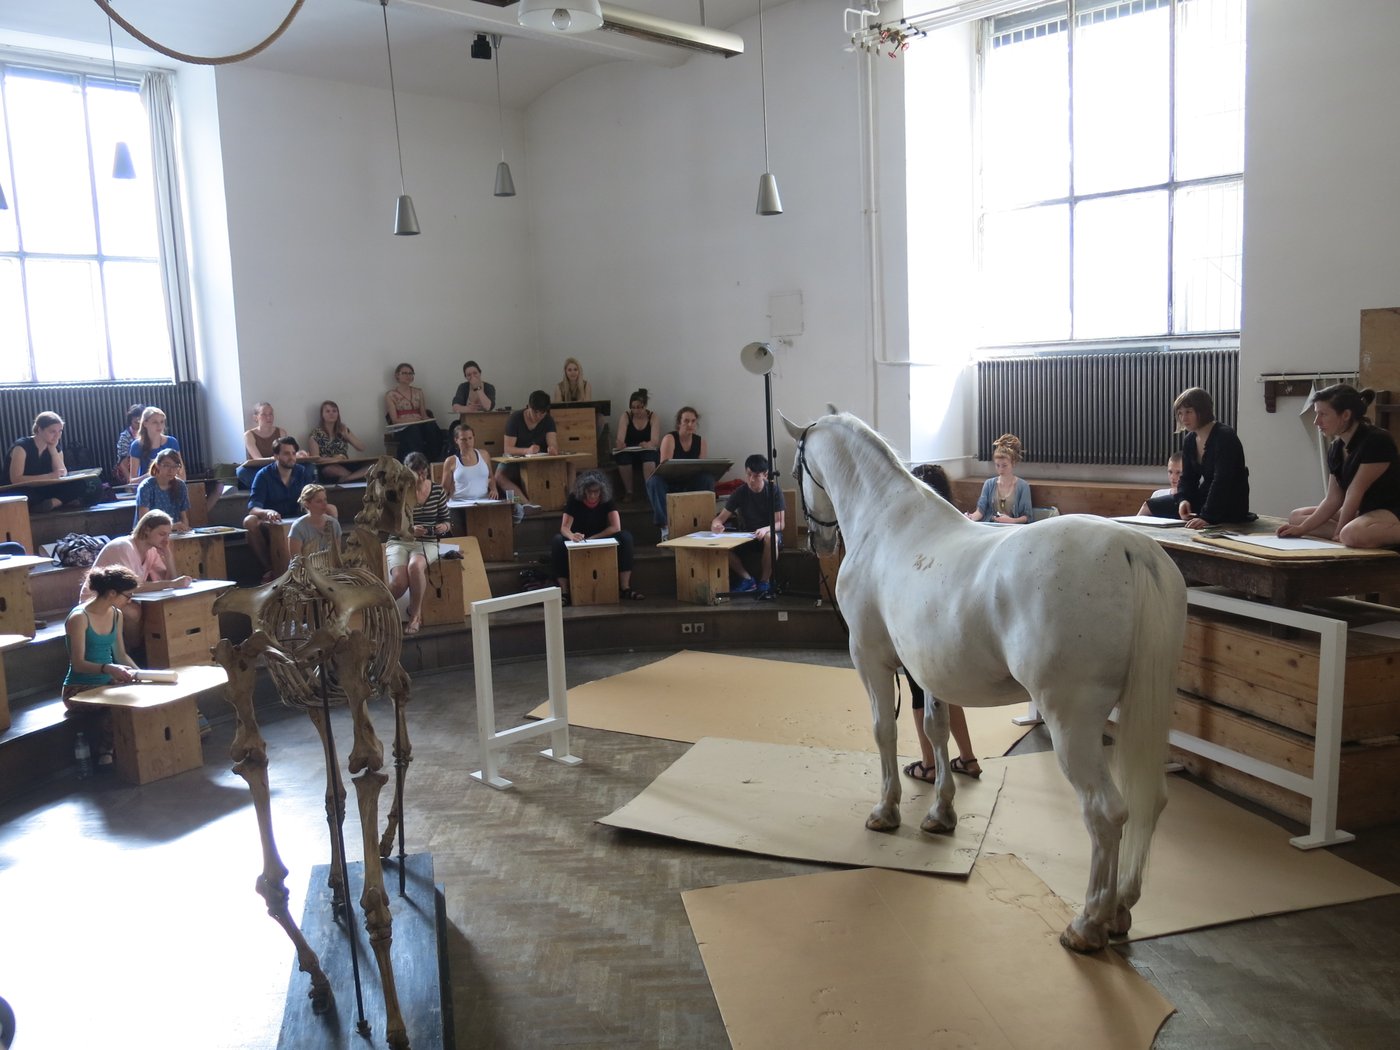 A white horse and a horse skeleton are drawn by students. They sit on a 4-tiered wooden gallery and use wooden boxes as a base.